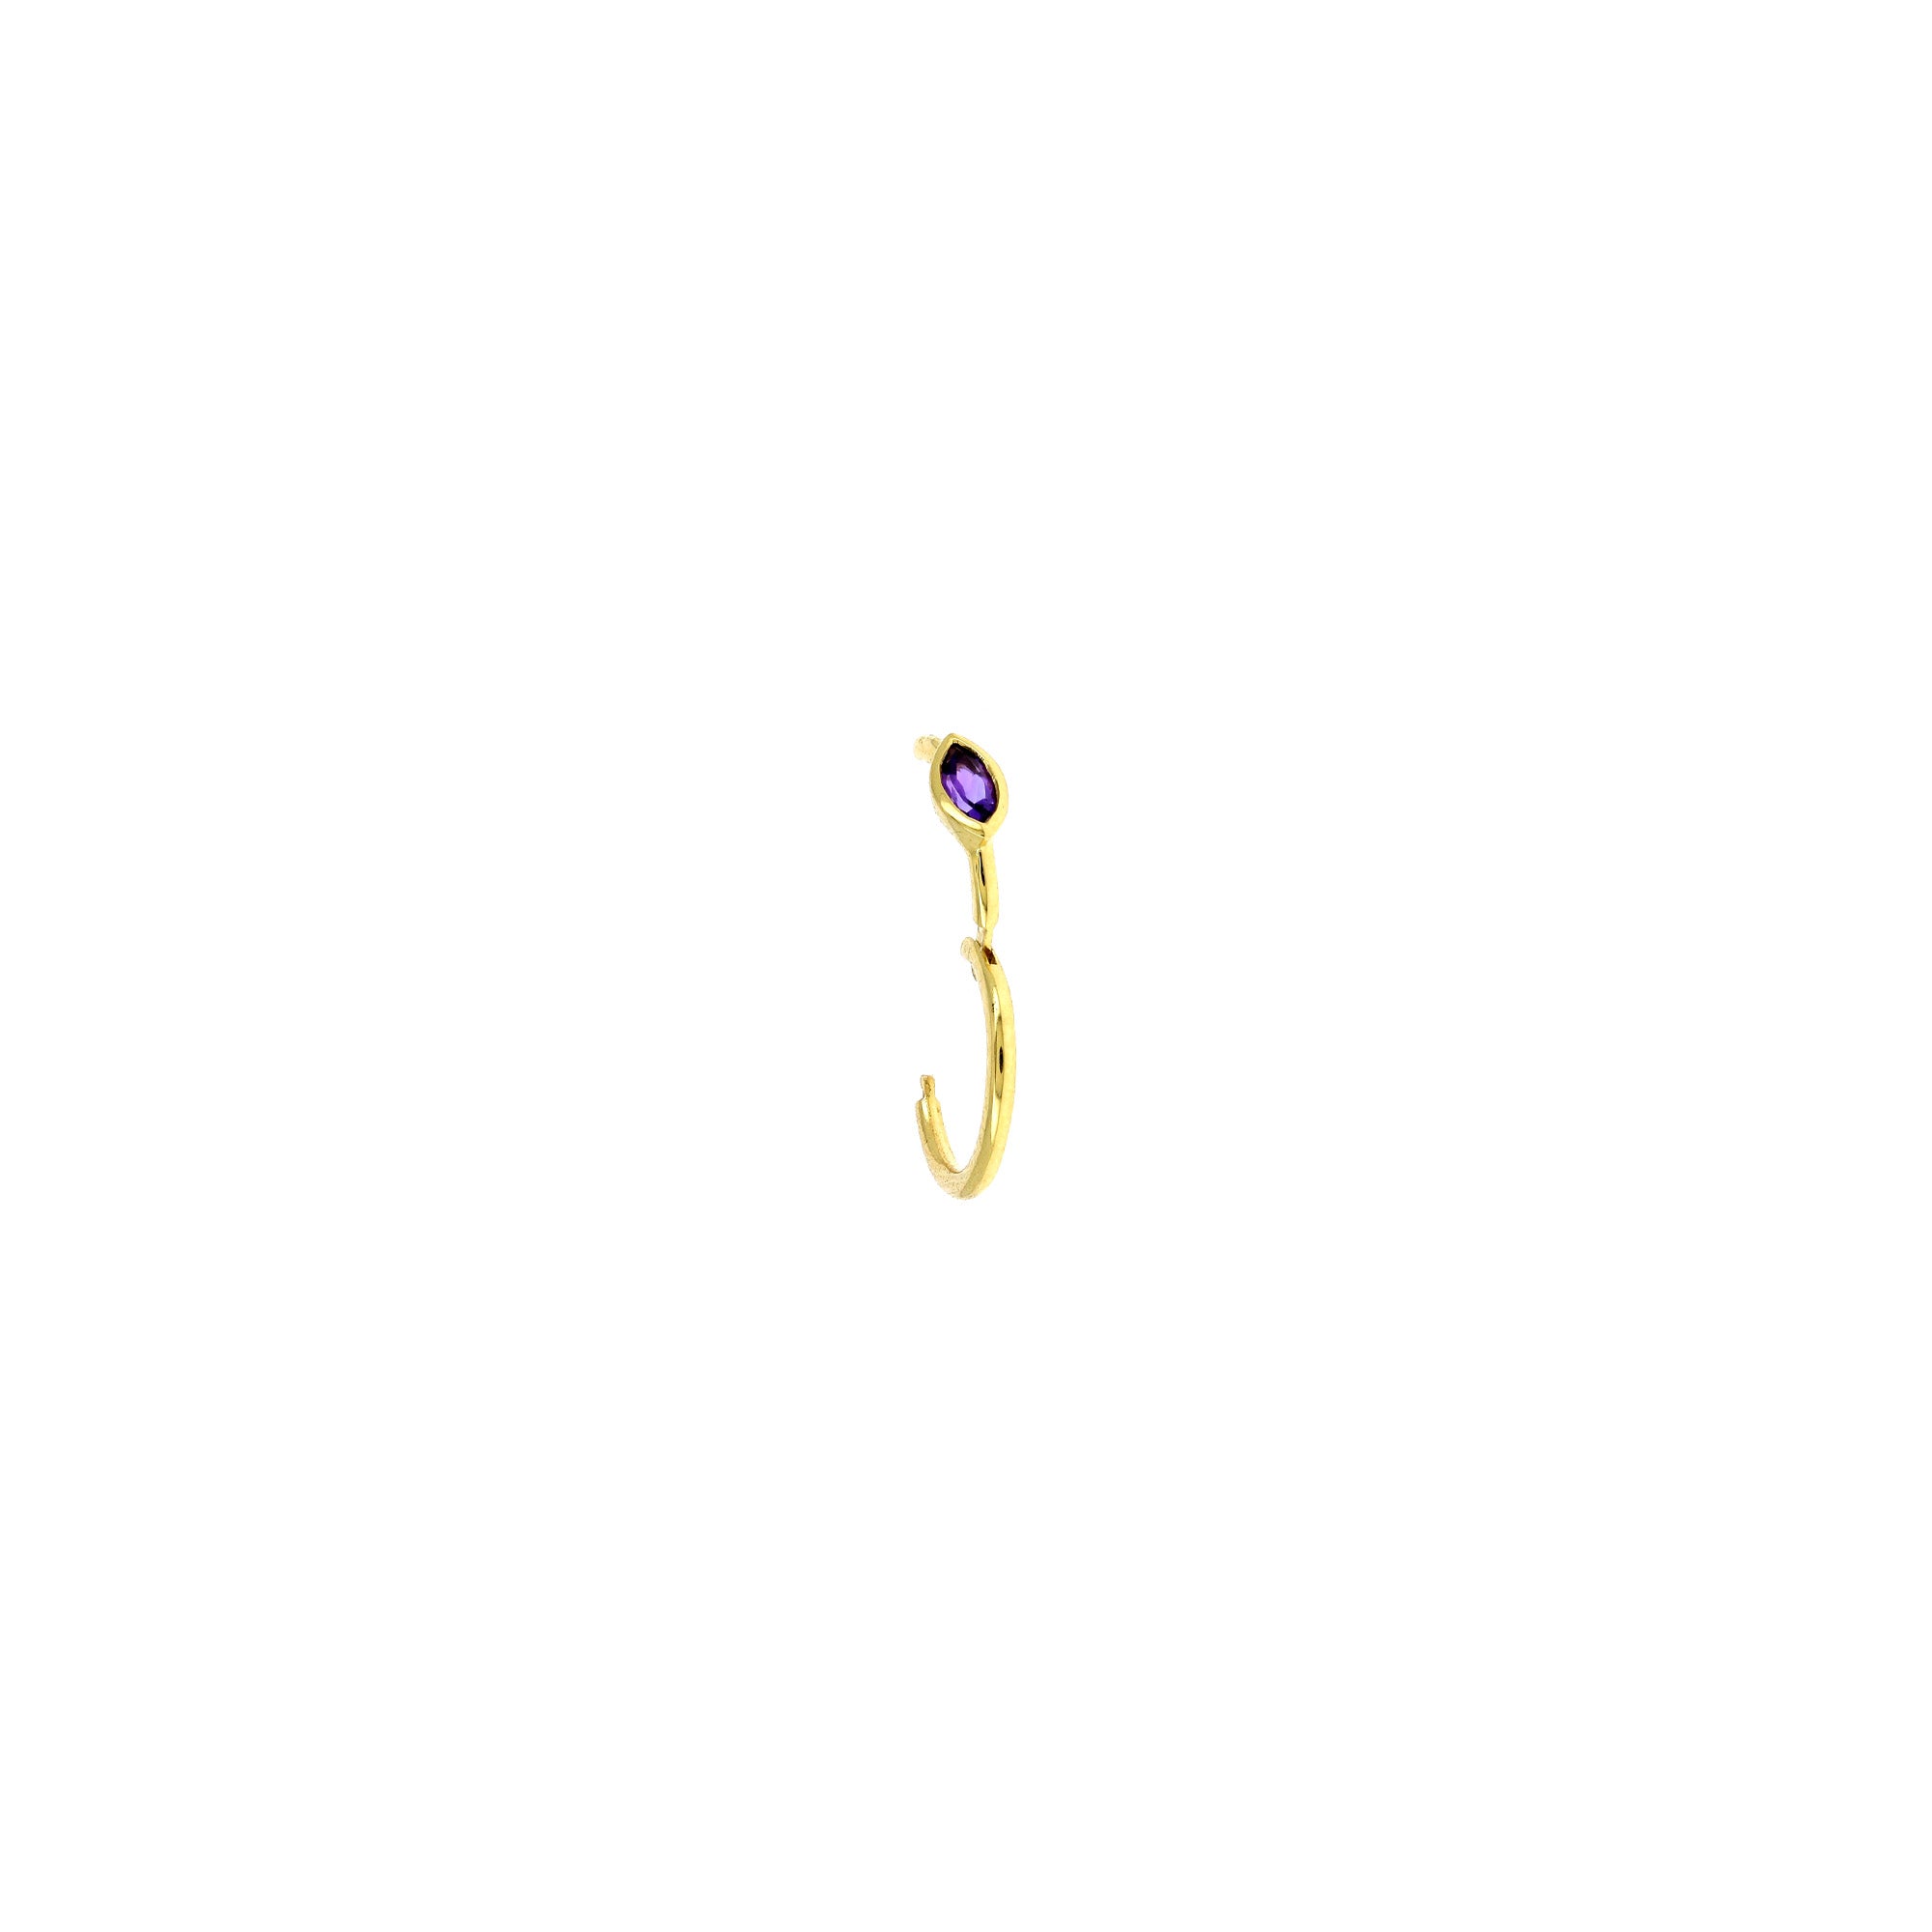 8mm Amethyst Marquise 3x2mm Yellow Gold Hoop